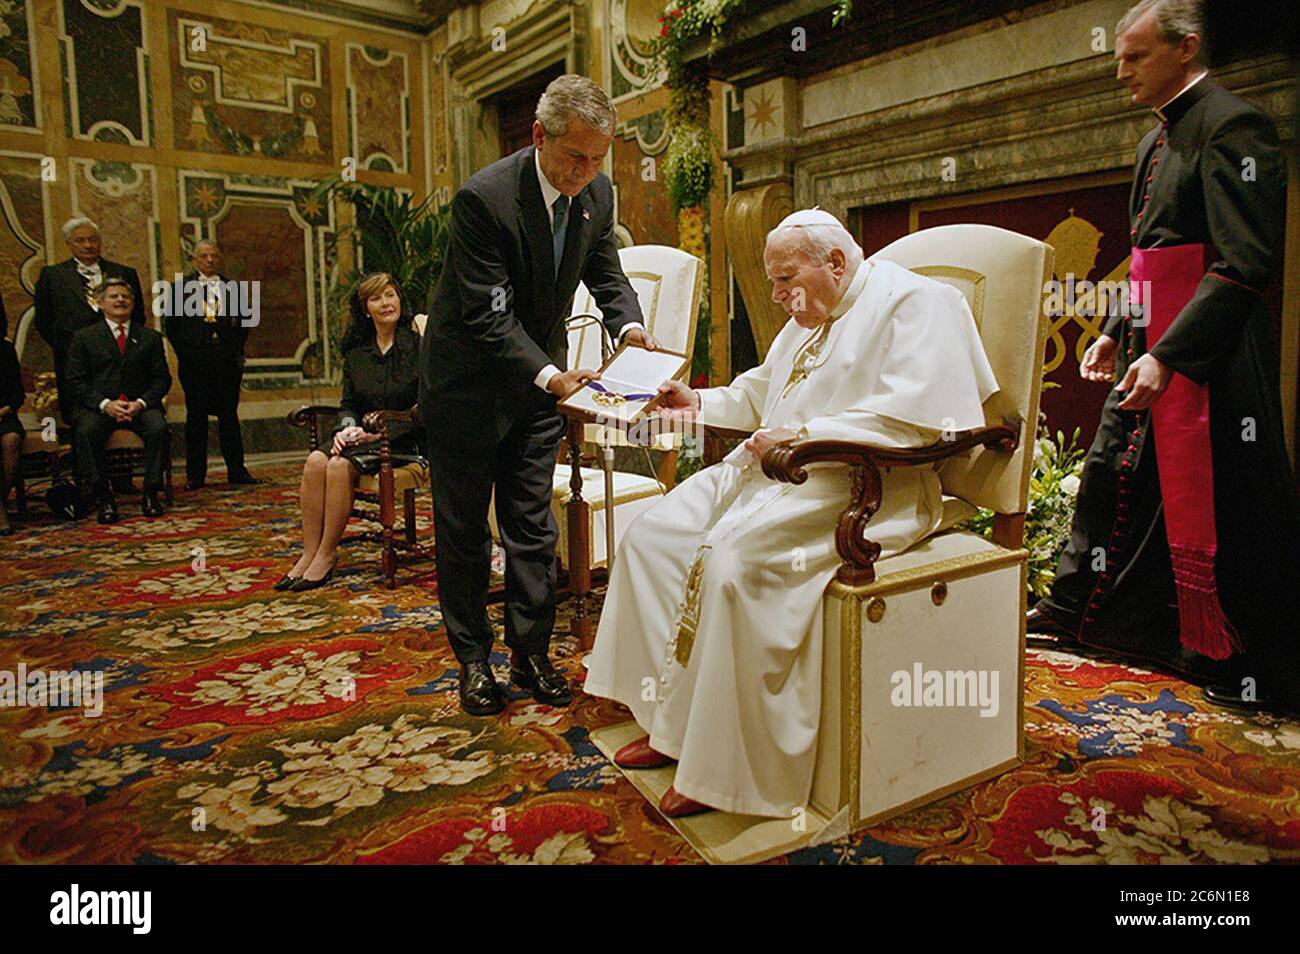 President George W. Bush presents the Medal of Freedom to Pope John Paul II June 4, 2004, during a visit to the Vatican in Rome, Italy.  Photo by Eric Draper, Courtesy of the George W. Bush Presidential Library and Museum Stock Photo